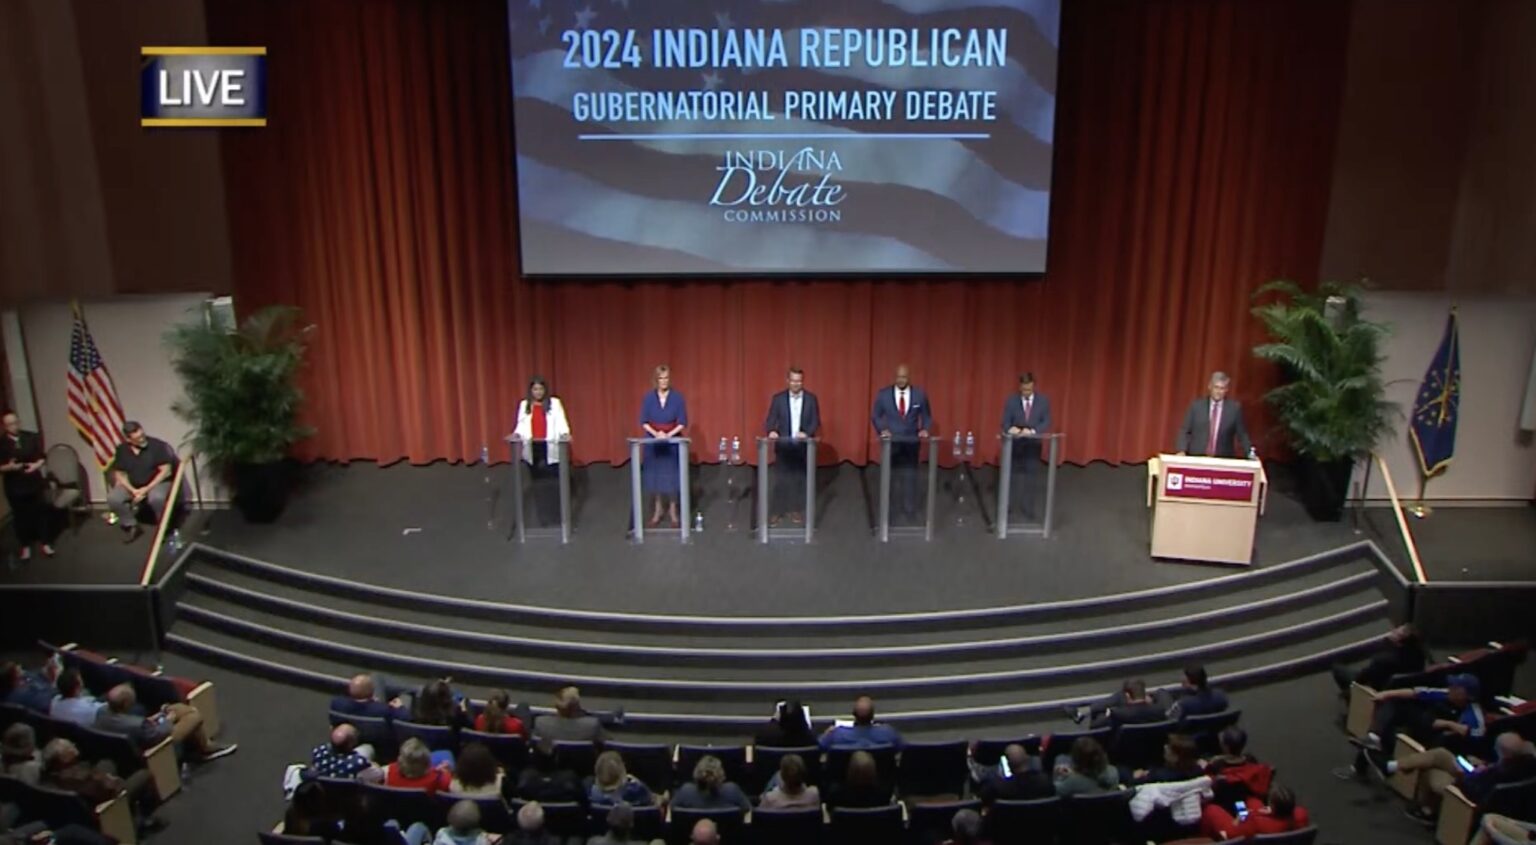  Five GOP candidates attended the final gubernatorial debate of the season Tuesday April 23, 2024. (Screenshot from livestream)